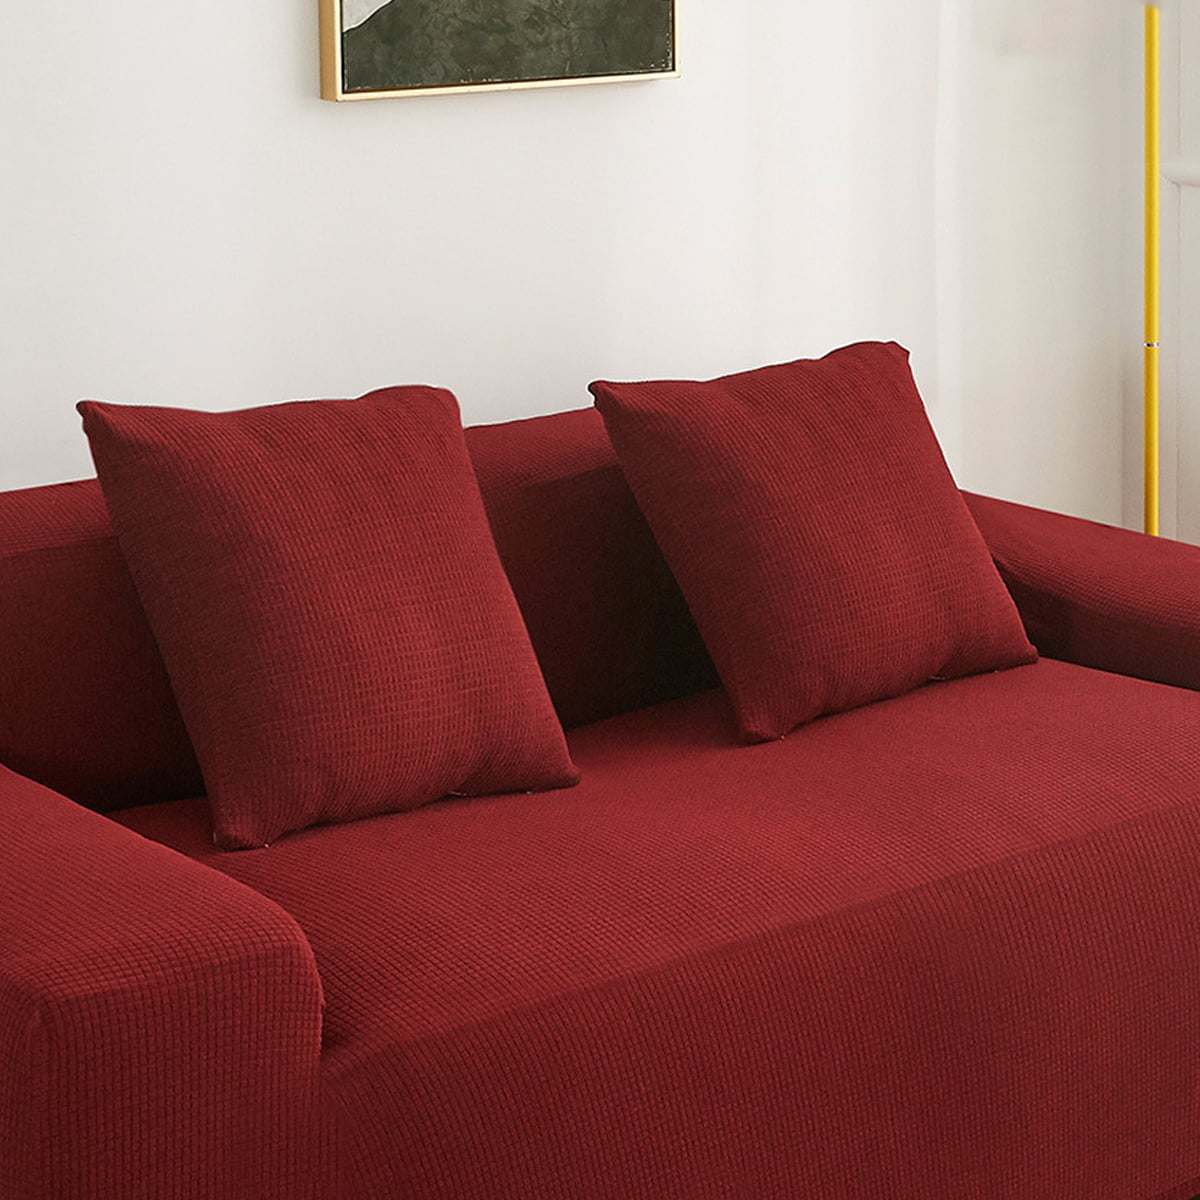 Details about   Modern Sofa Cover Linen Woven Non-slip Case Sofa Towel Couch Seater Sofa Cover 